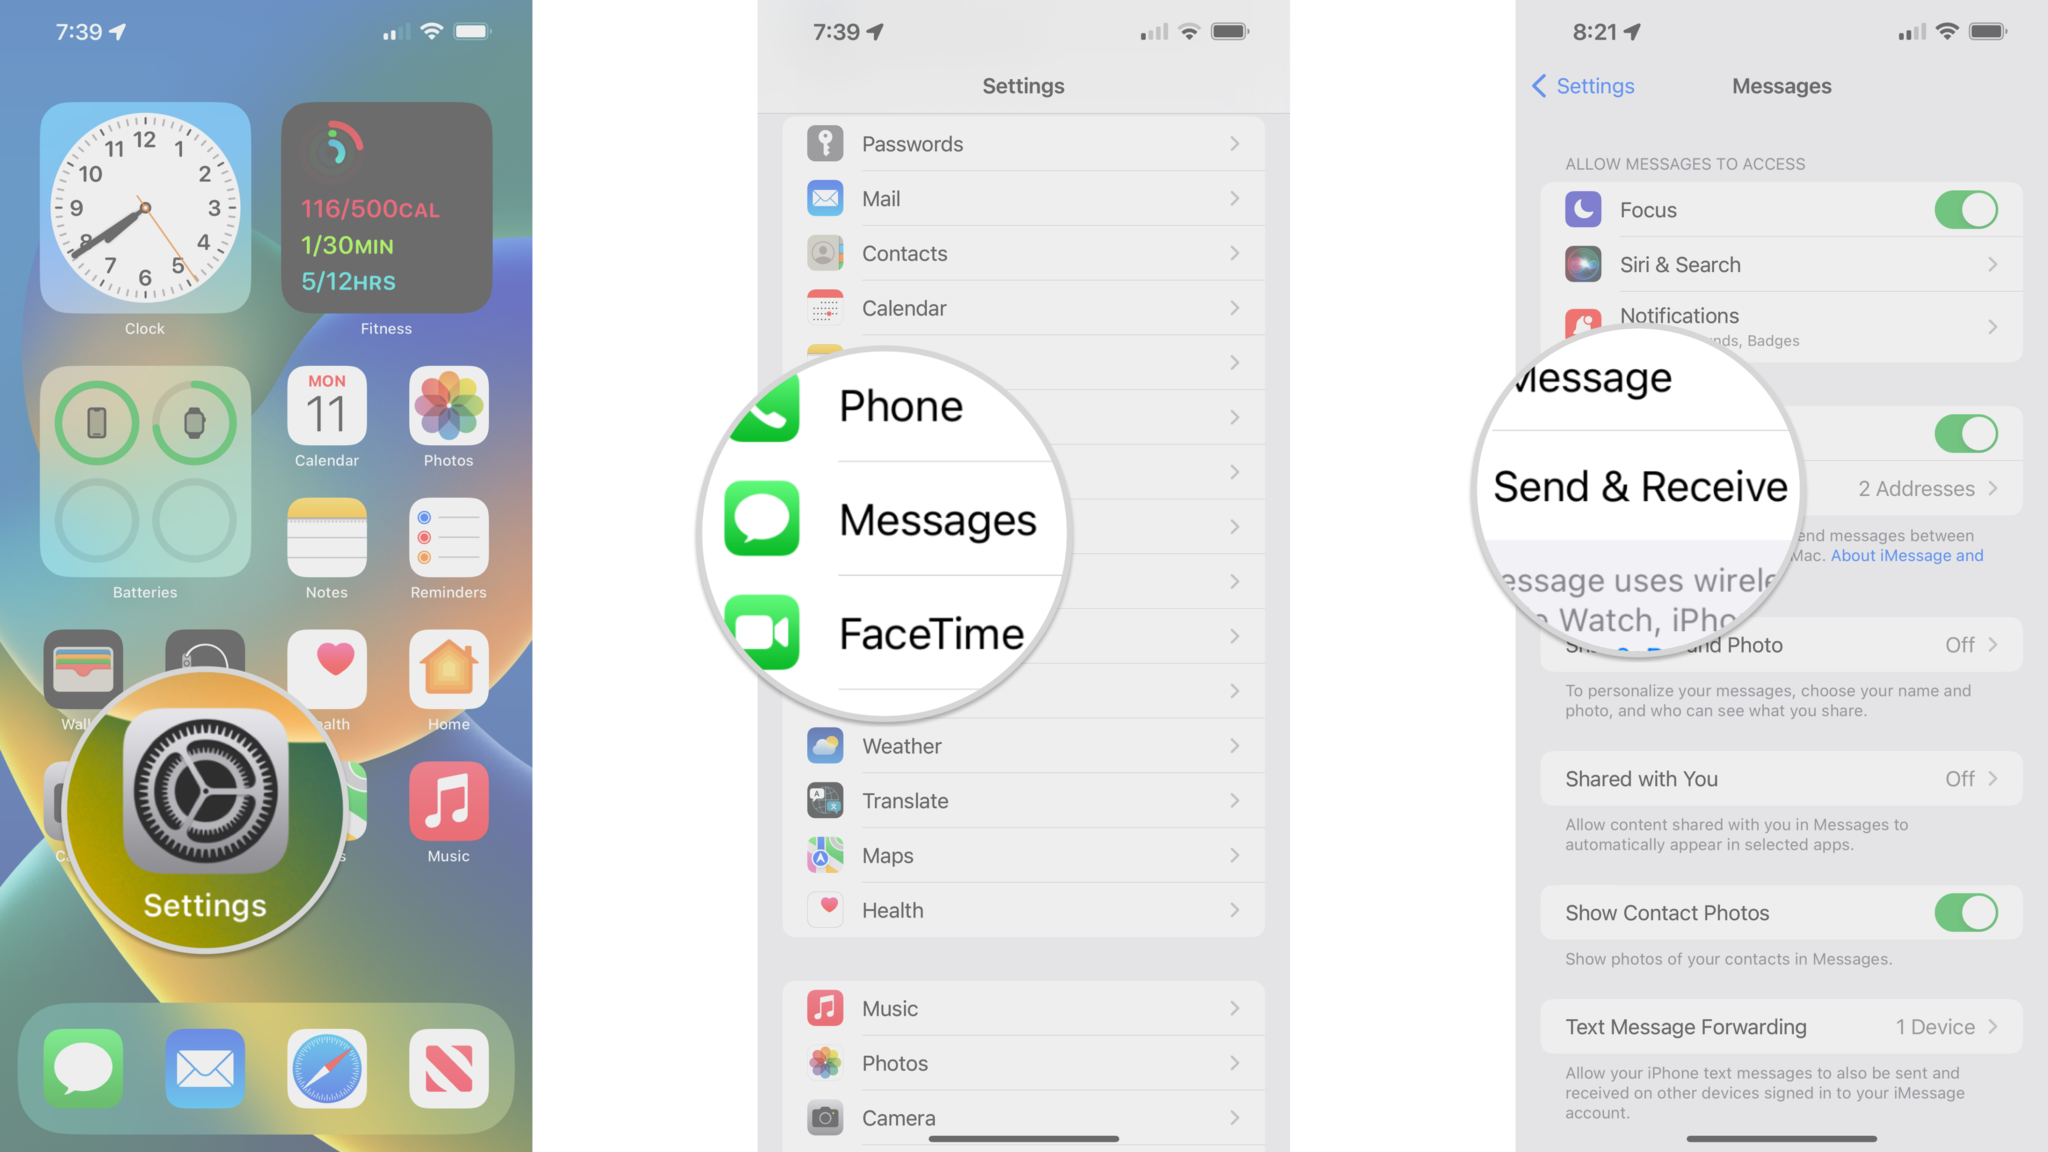 How to sign out of your Apple ID in Messages on the iPhone by showing steps: Launch Settings, Tap Messages, Tap Send & Receive